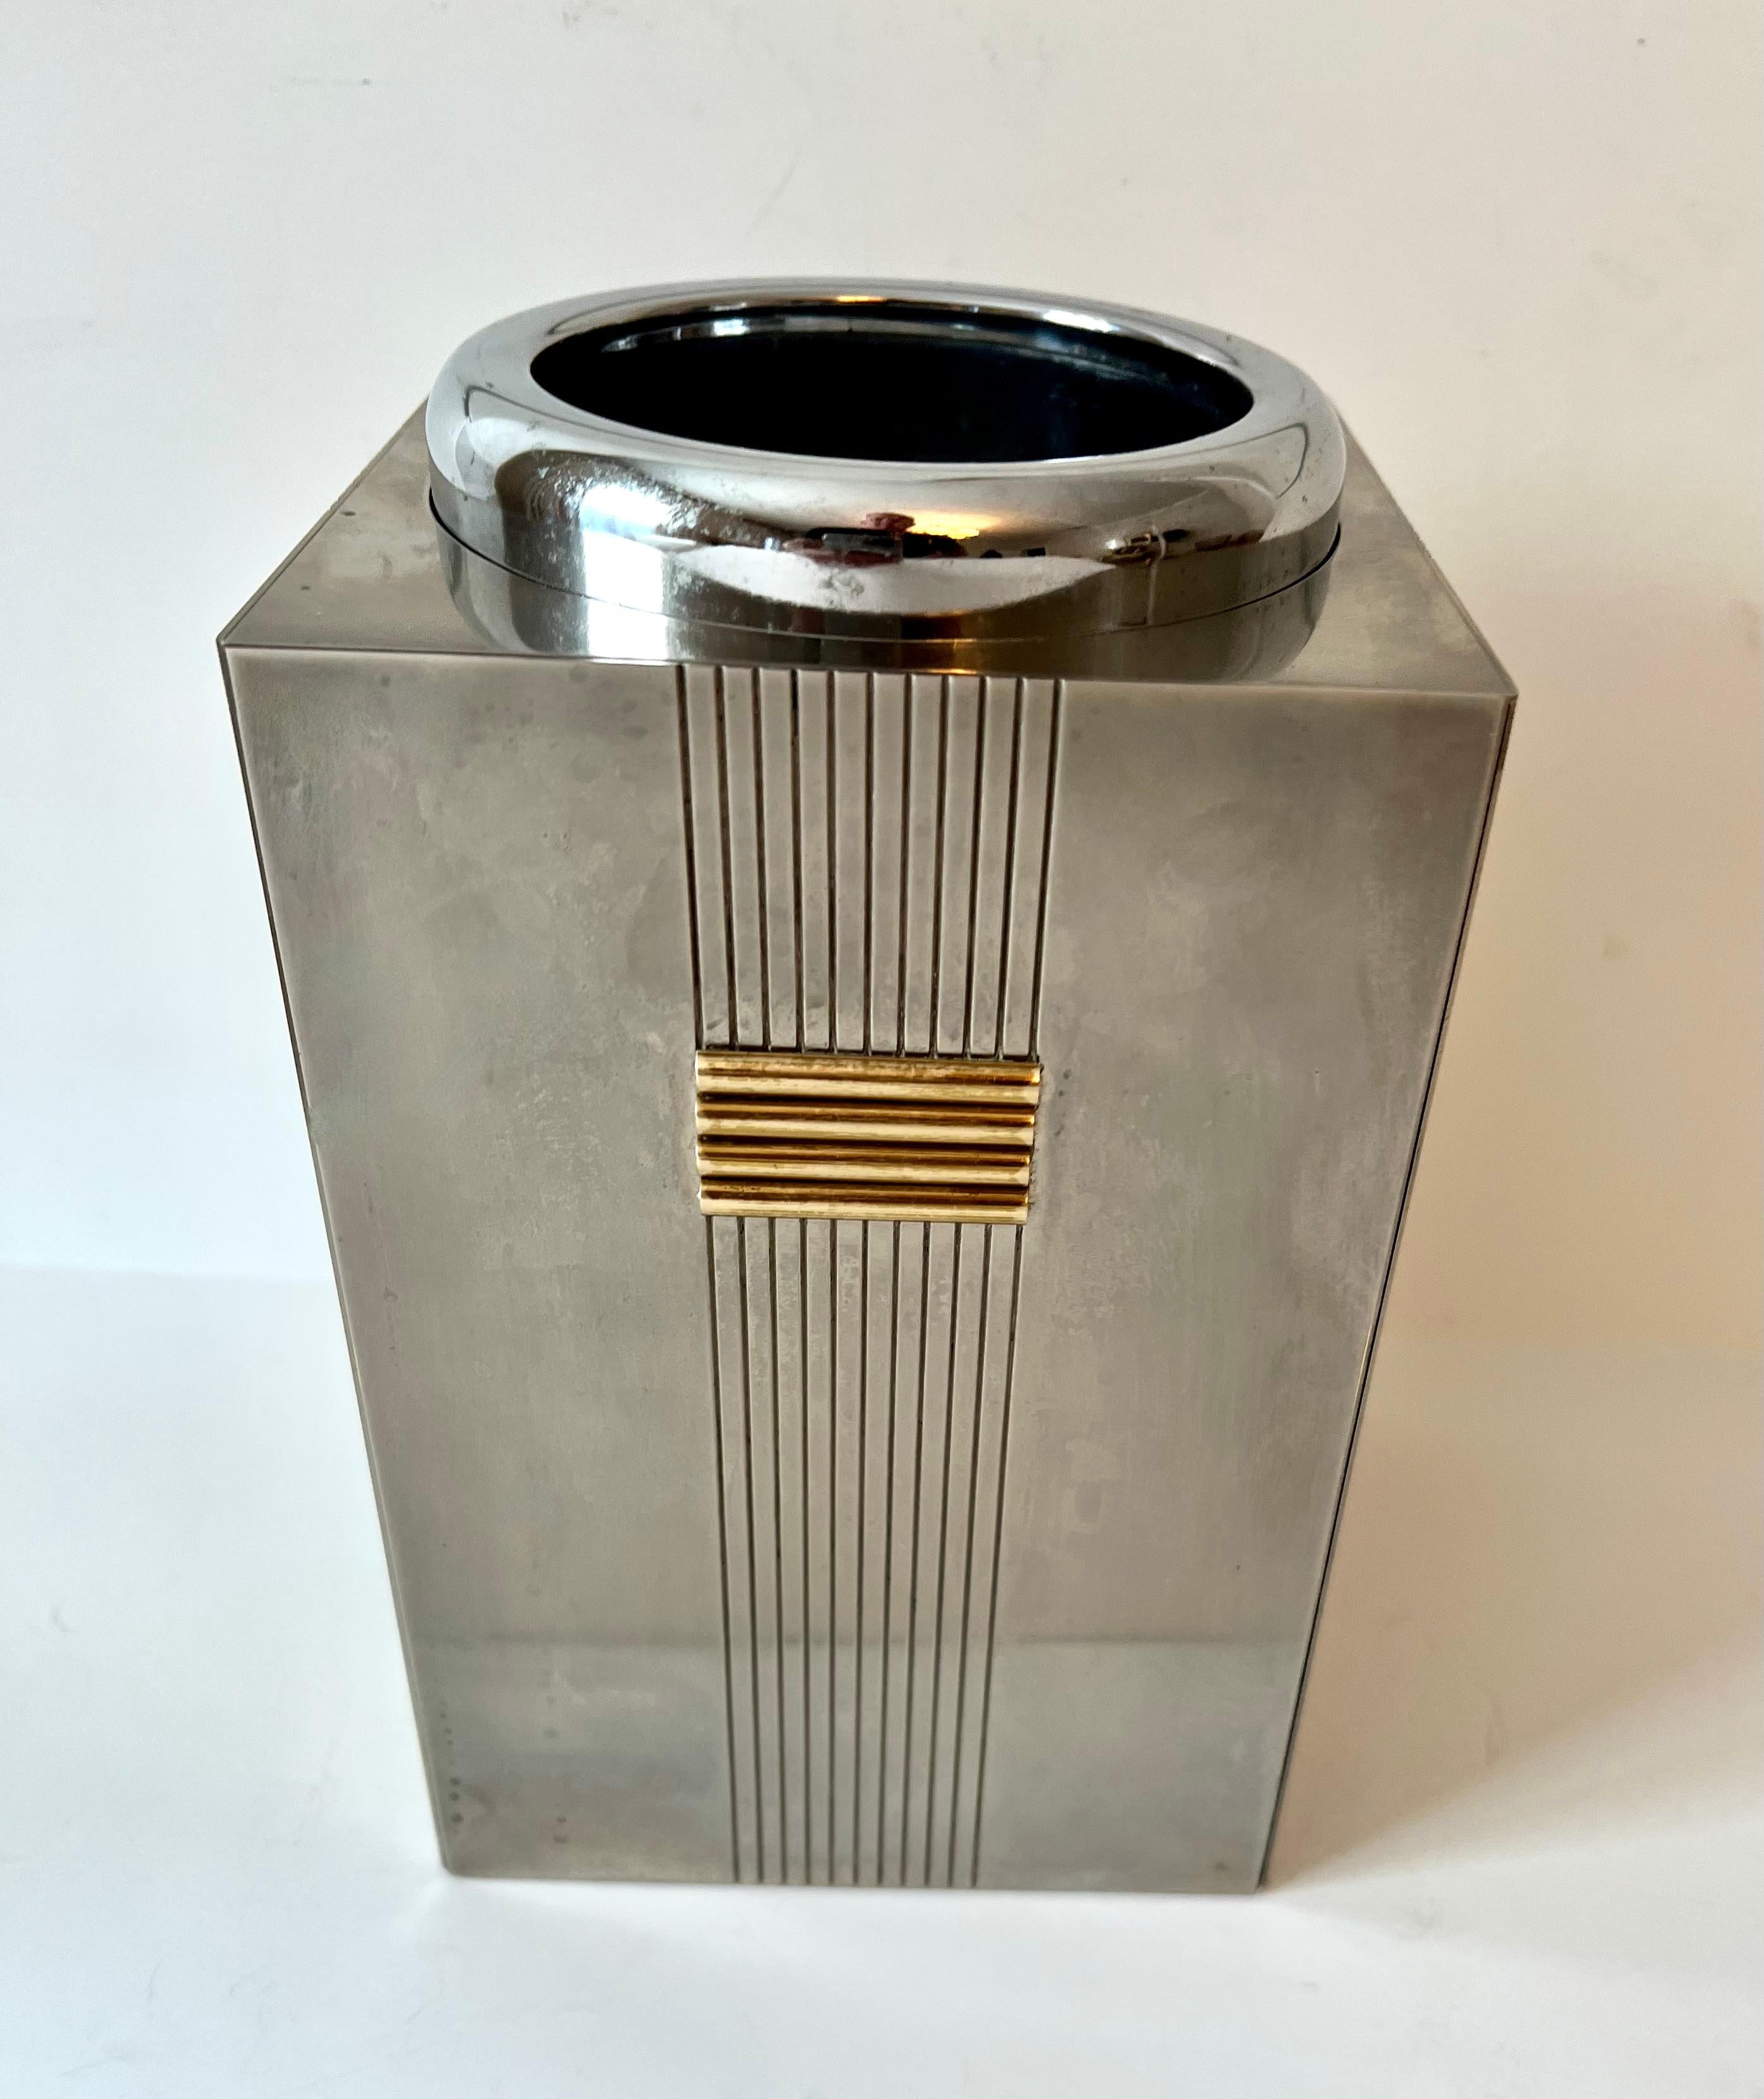 Christian Dior Champagne and wind cooler. The piece has a very easy to remove insert for chilling... the exterior is a luxurious shine with a ridge detail with gold bar details. 

A must have for any sophisticated bar. Makes a wonderful